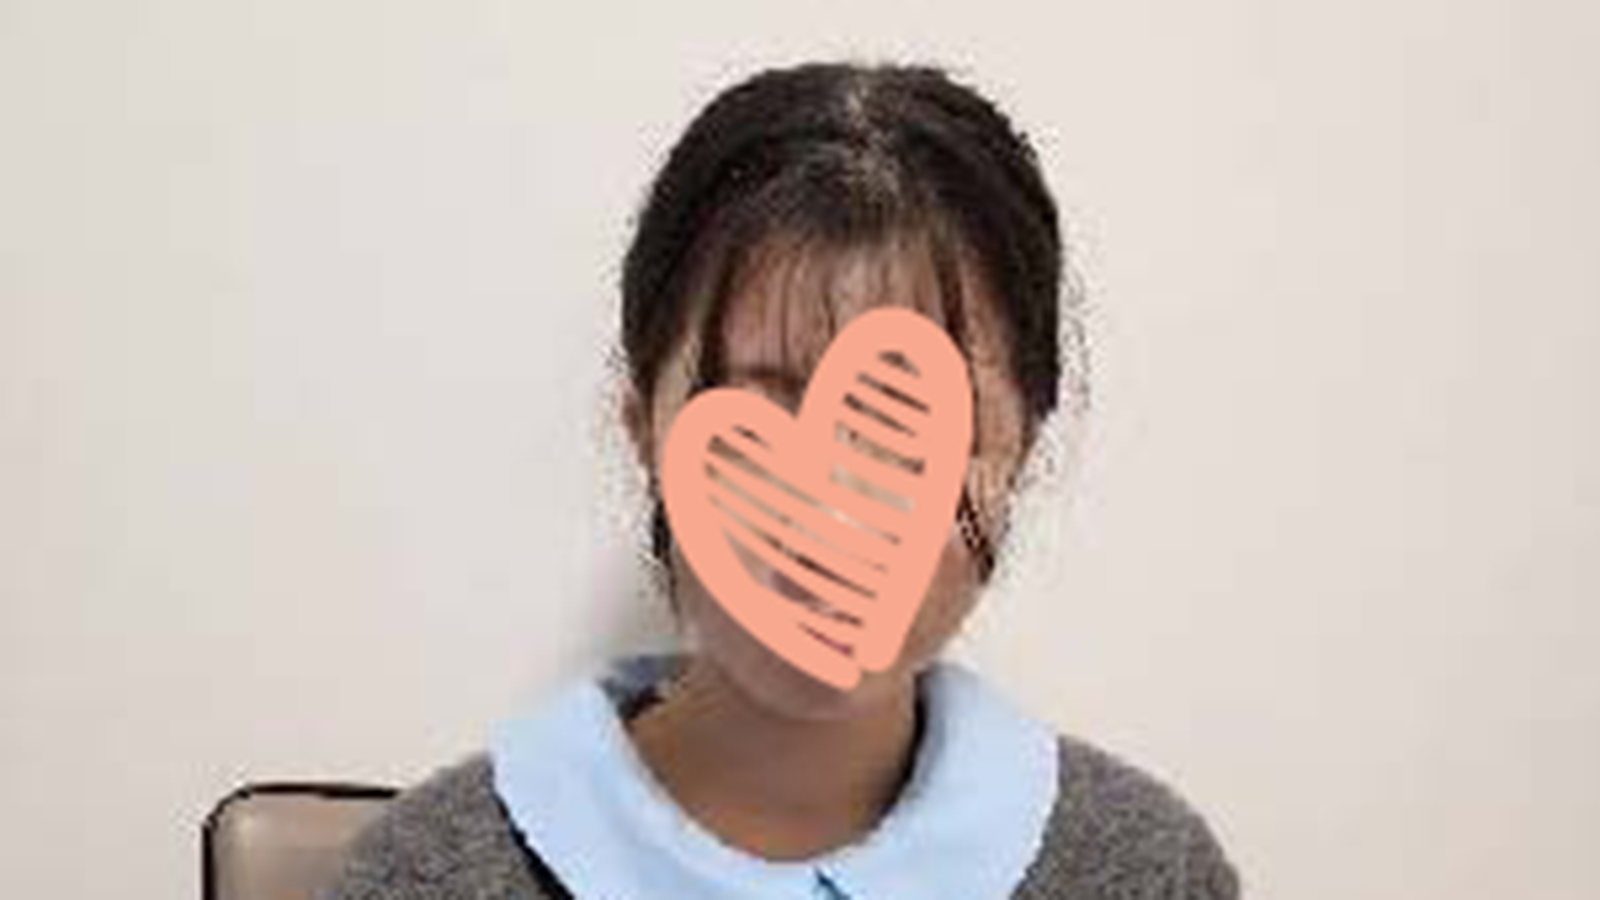 girl with heart graphic covering face needs adoptive family